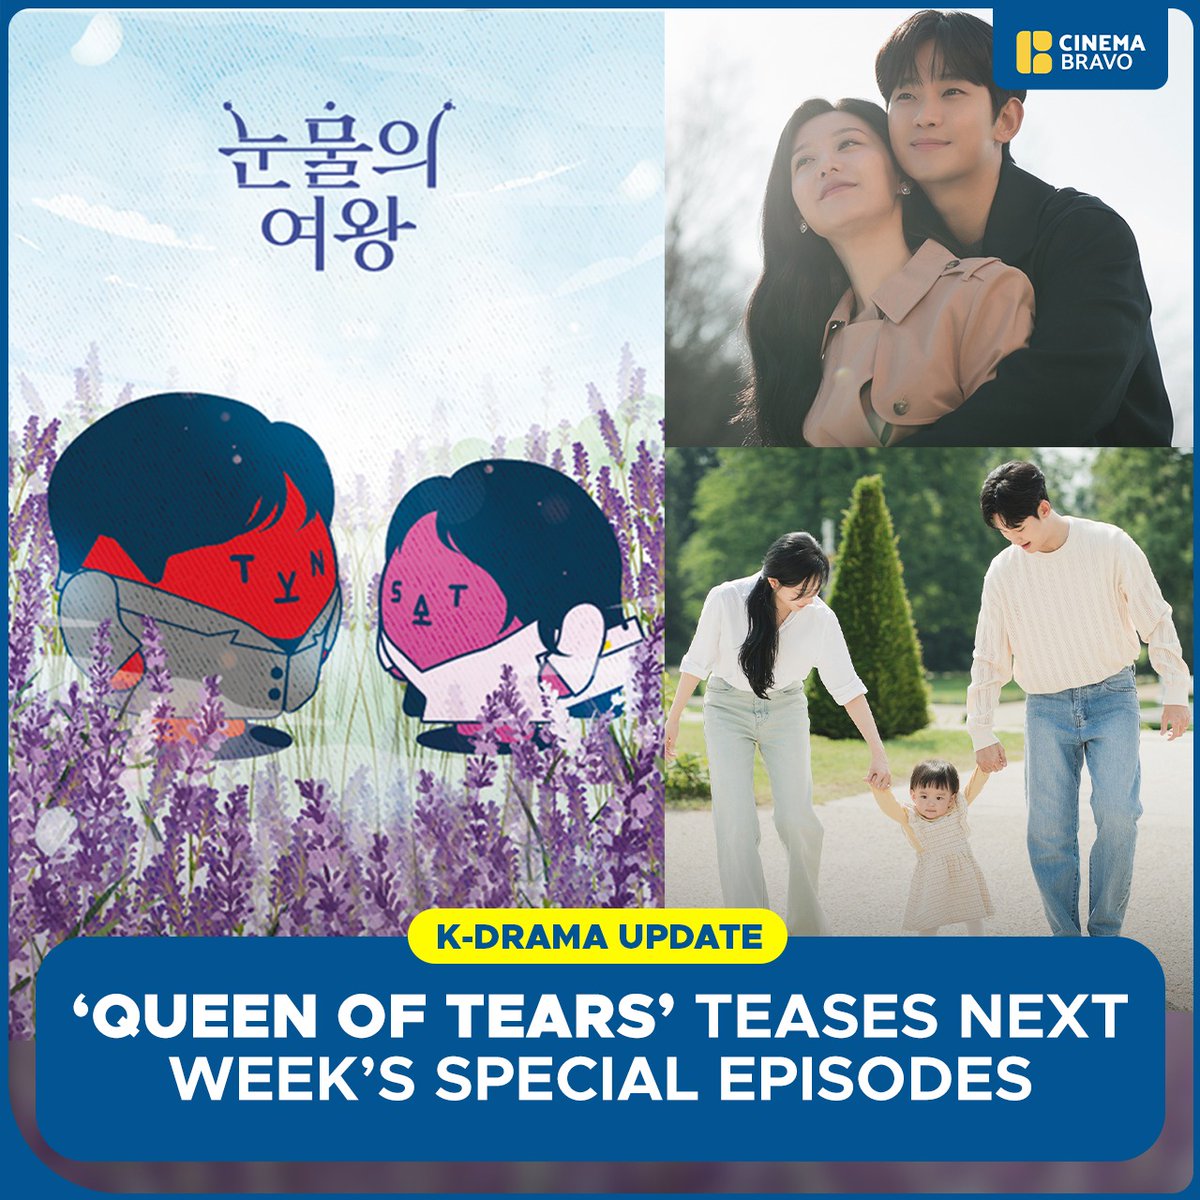 BREAKING: tvN has just released the official poster for the #QueenOfTears final episodes ‘Queen of Tears: Miraculous Record Zip’ on May 4 & 5. “Both the Queens family and the Yongduri family have a happy ending! Thank you to all the viewers who loved us.”